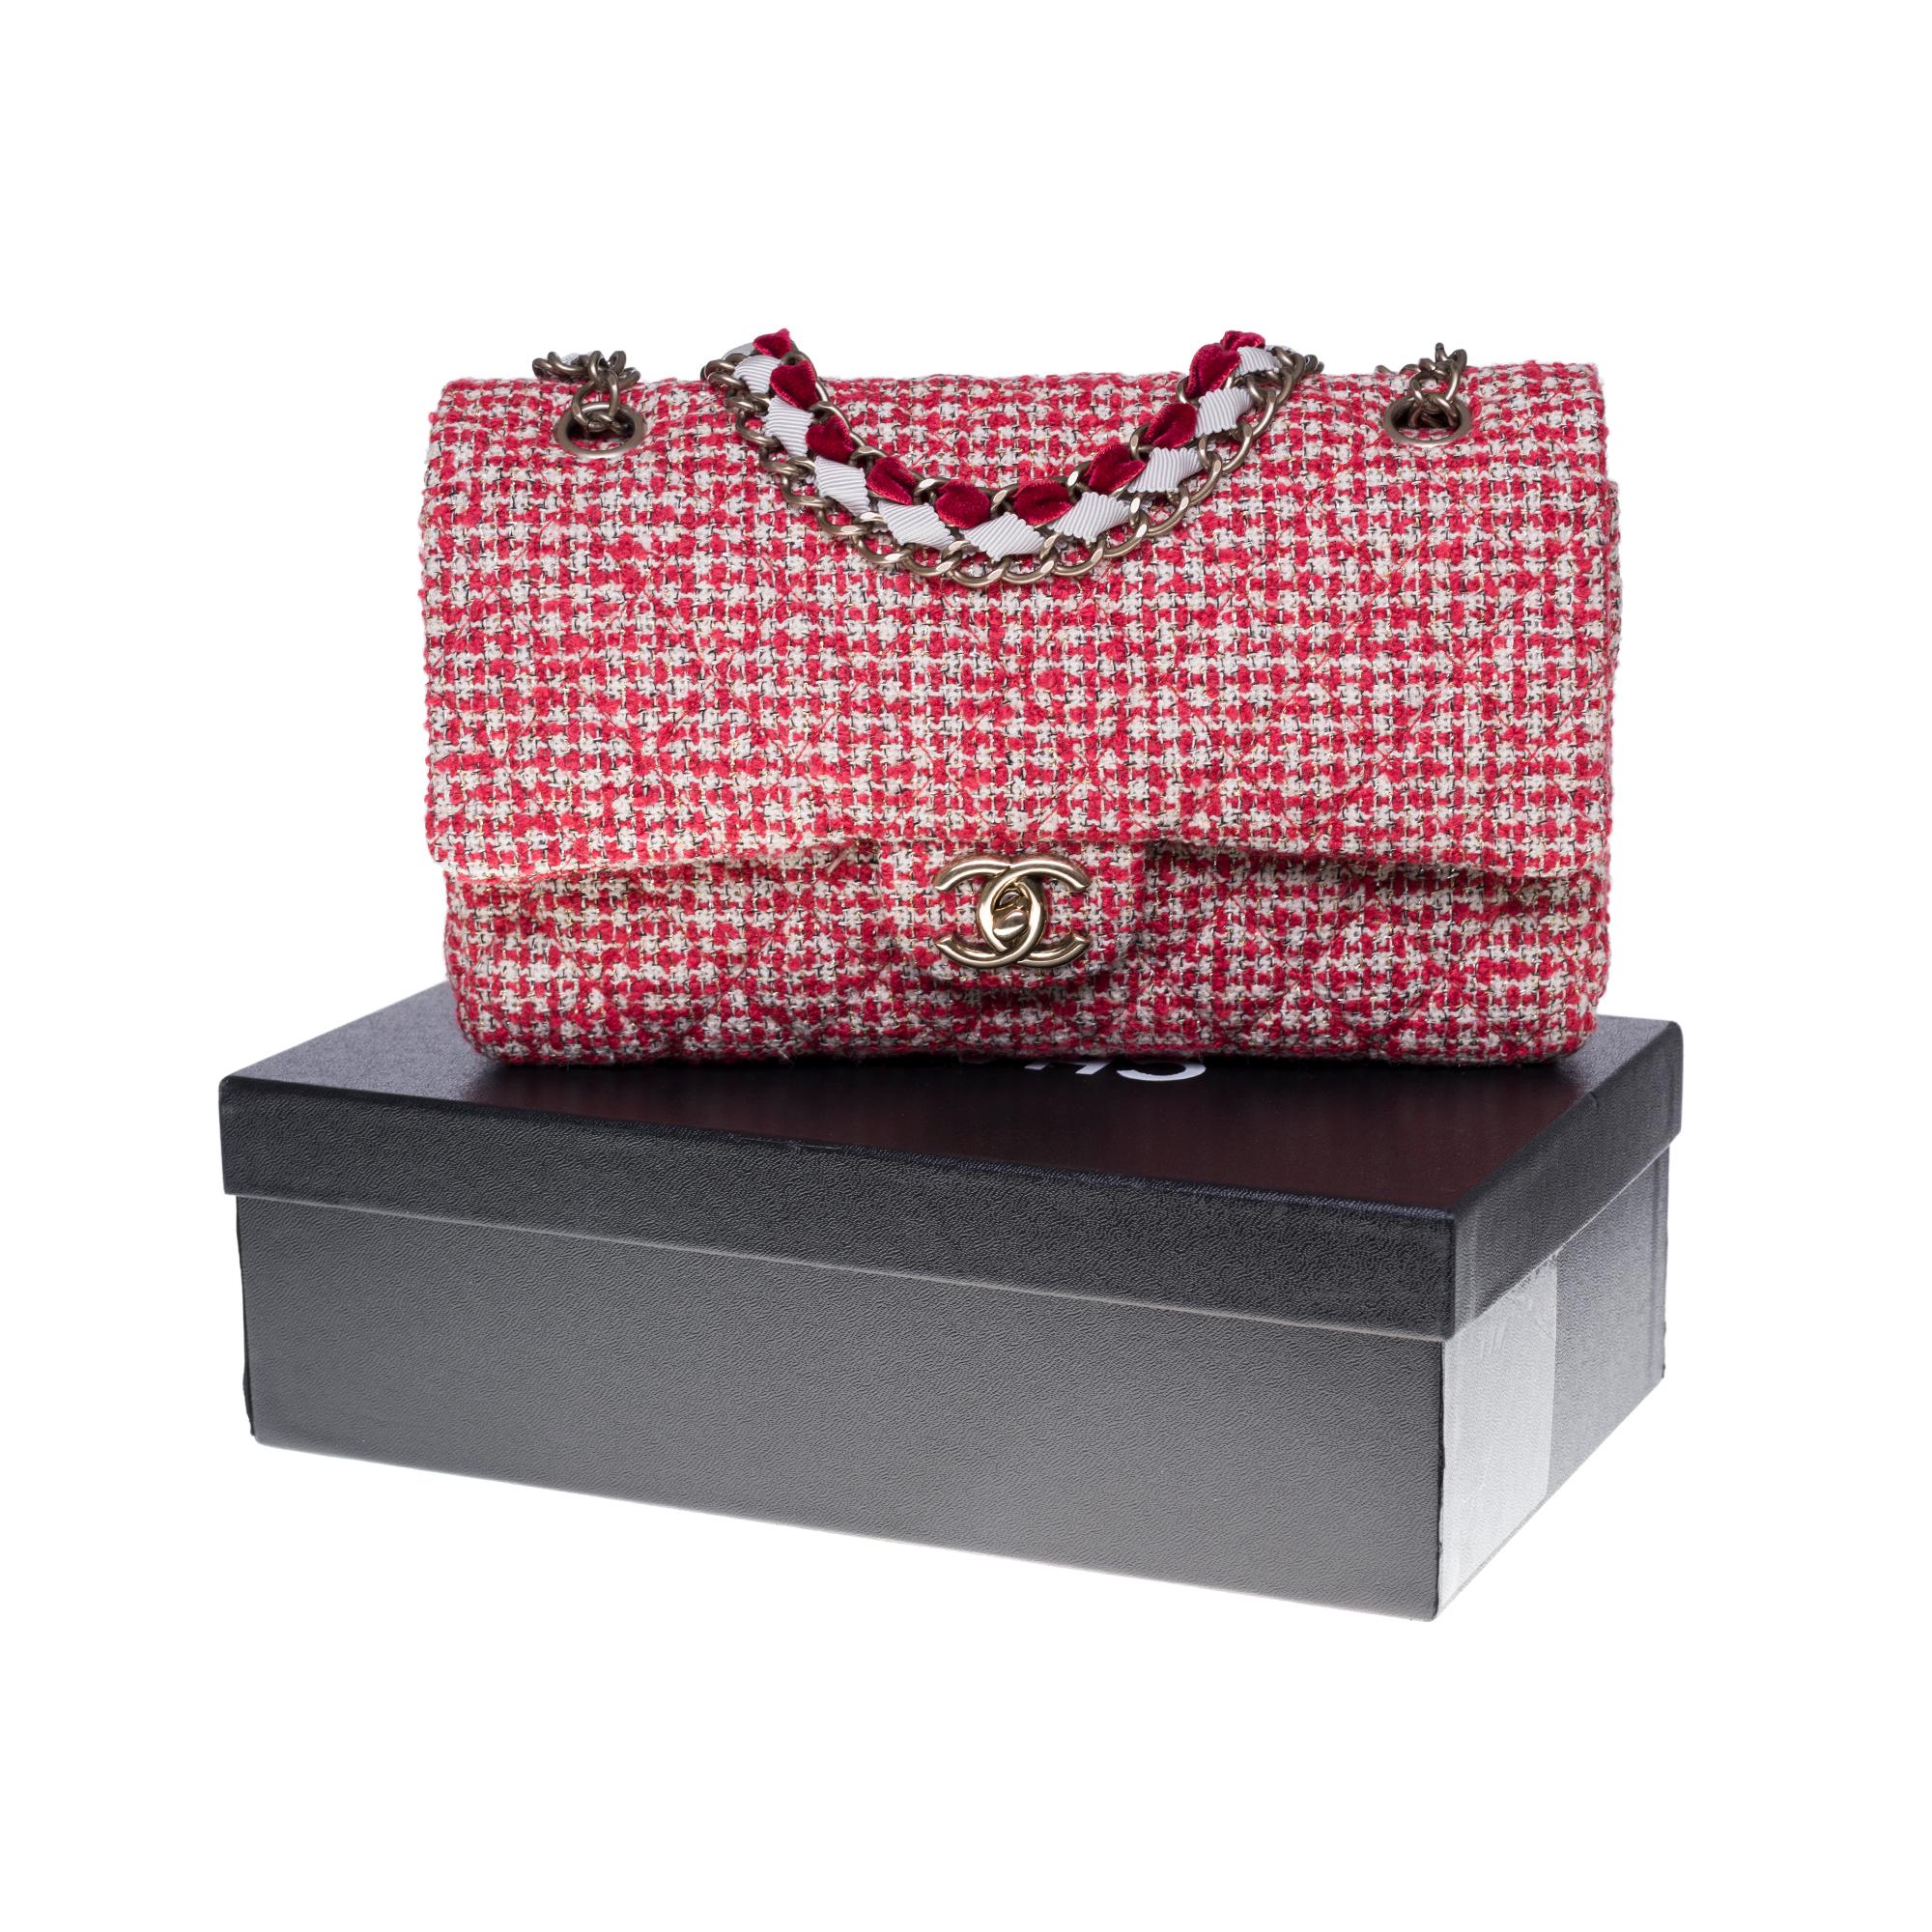 Limited Edition Chanel Timeless Shoulder bag in Red & White Tweed, SHW 7